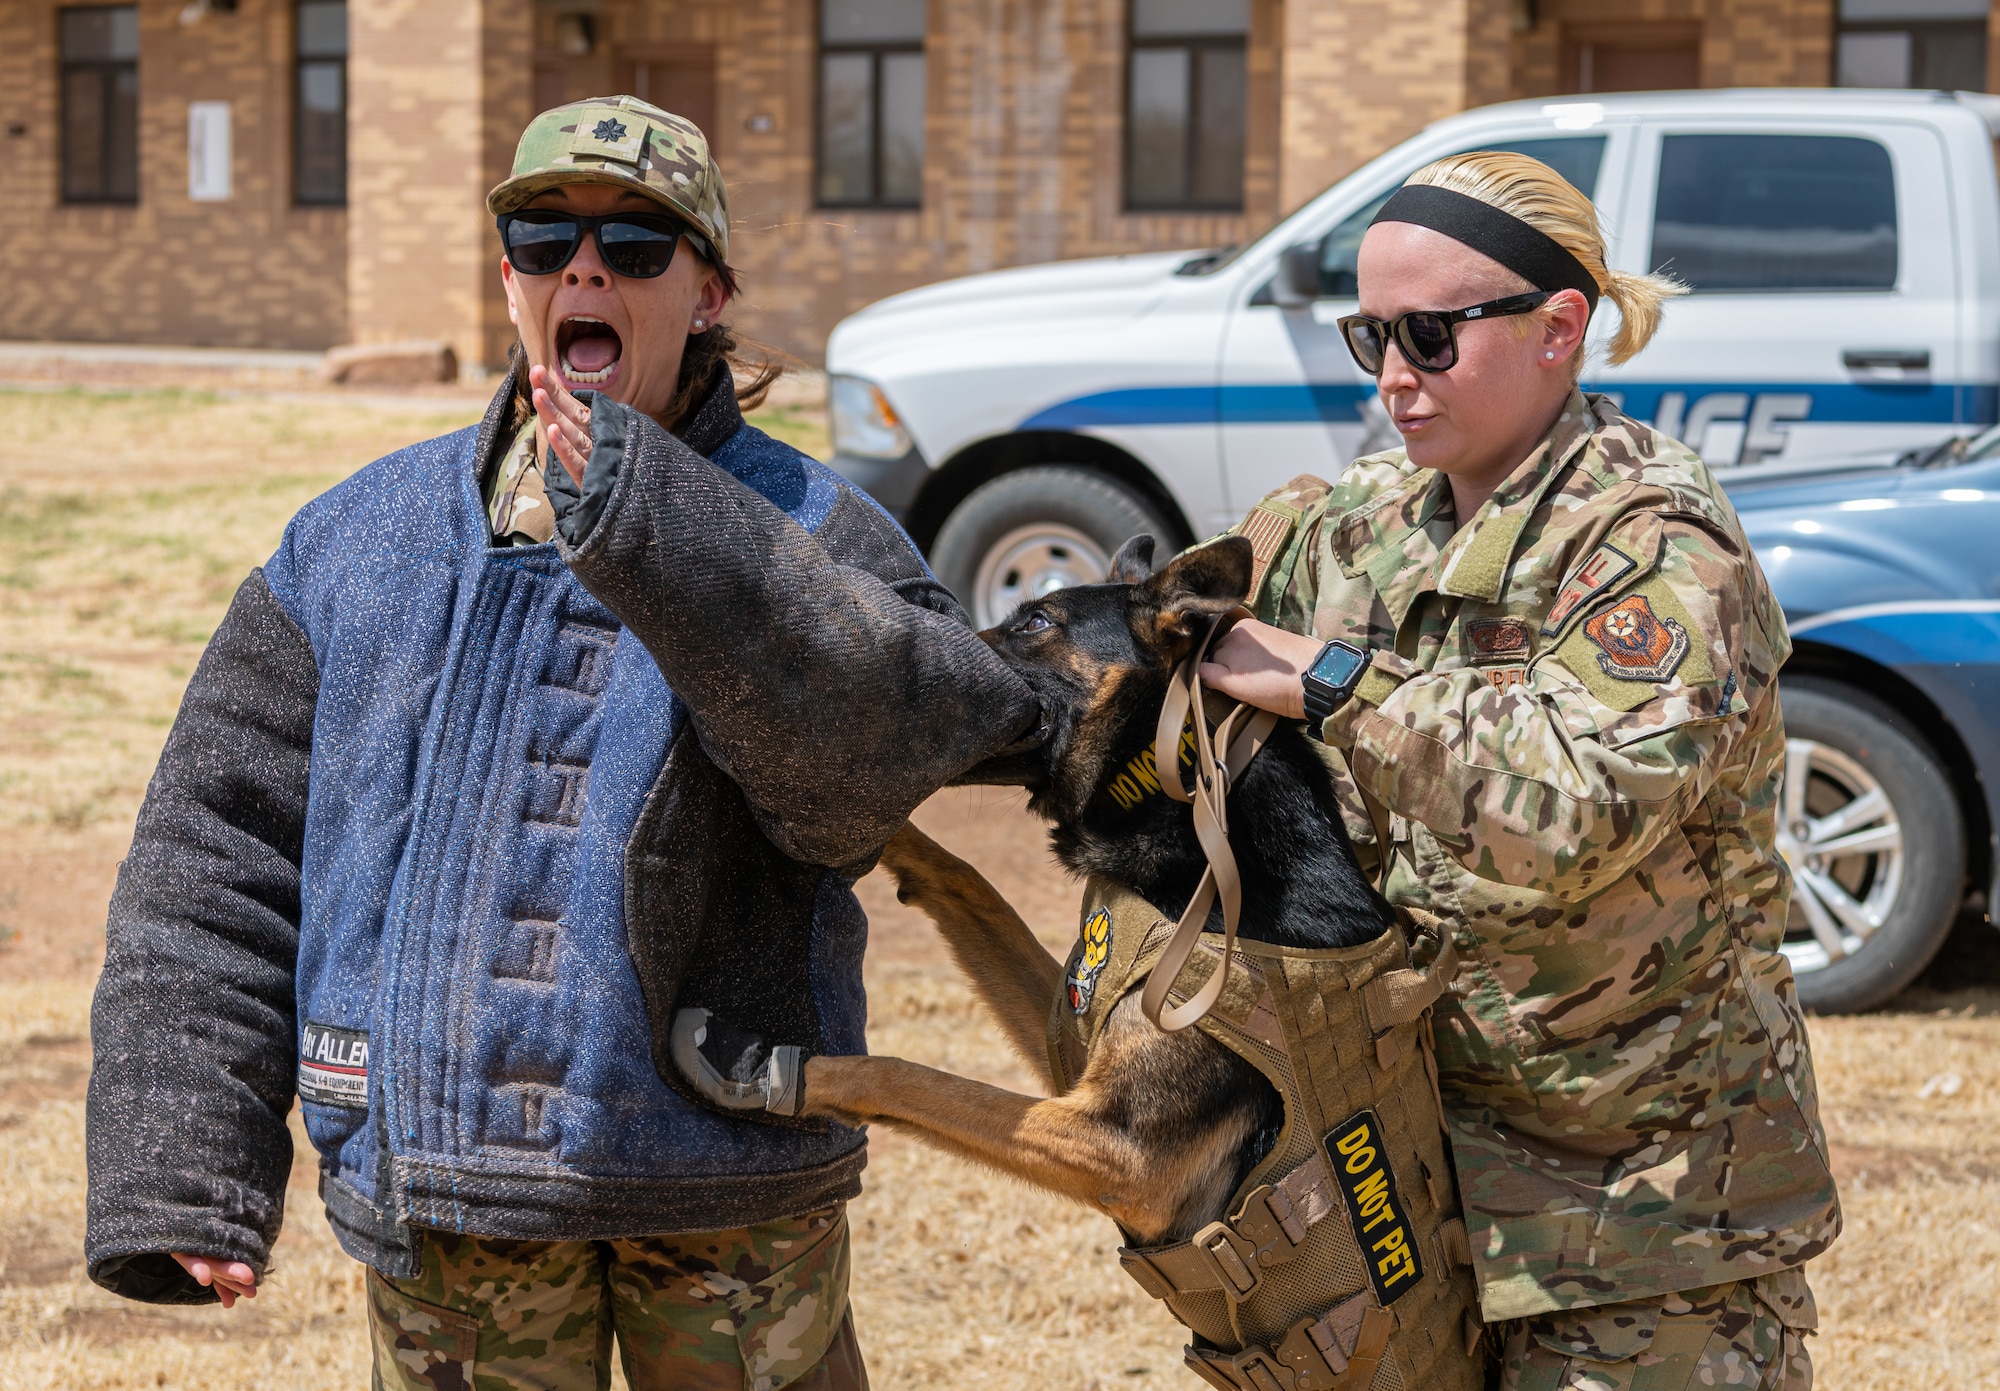 An Airman wearing a protective suit reacts as a military working dog handler guides a military working dog to bite her arm.